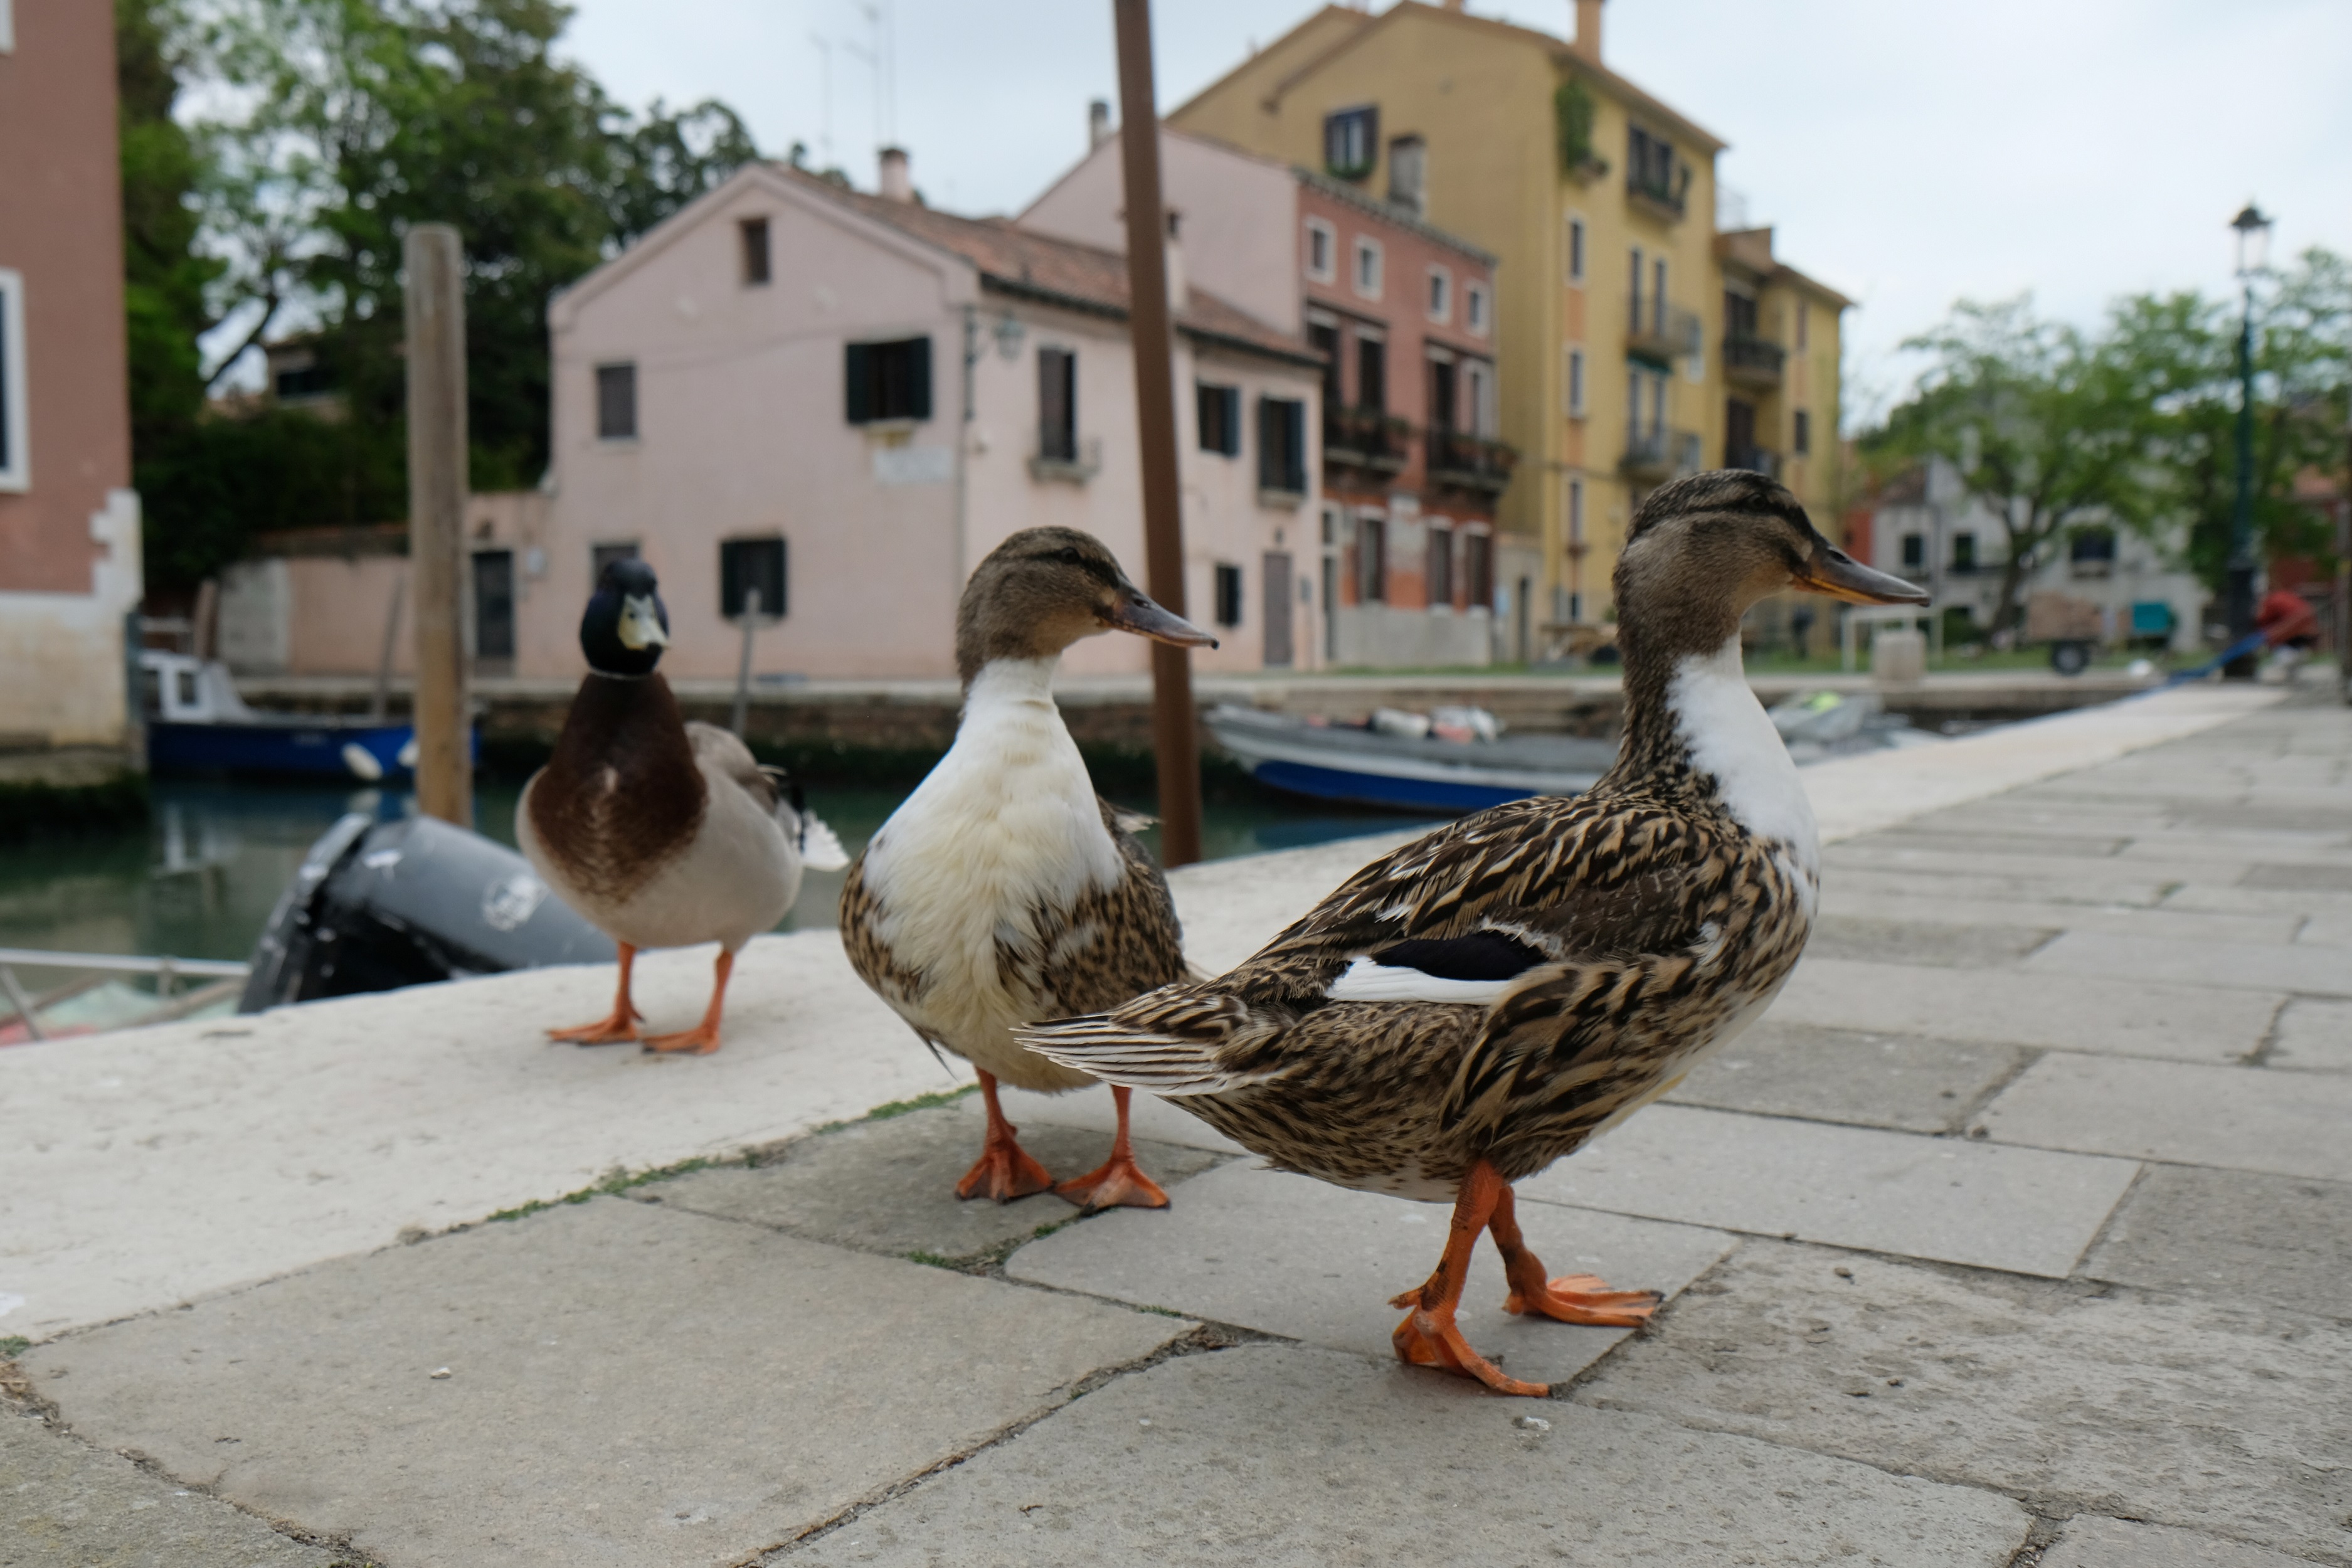 Ducks walk freely in the streets during the spread of the coronavirus disease (COVID-19) that have reduced the presence of people, in Venice, Italy, April 27, 2020. REUTERS/Manuel Silvestri